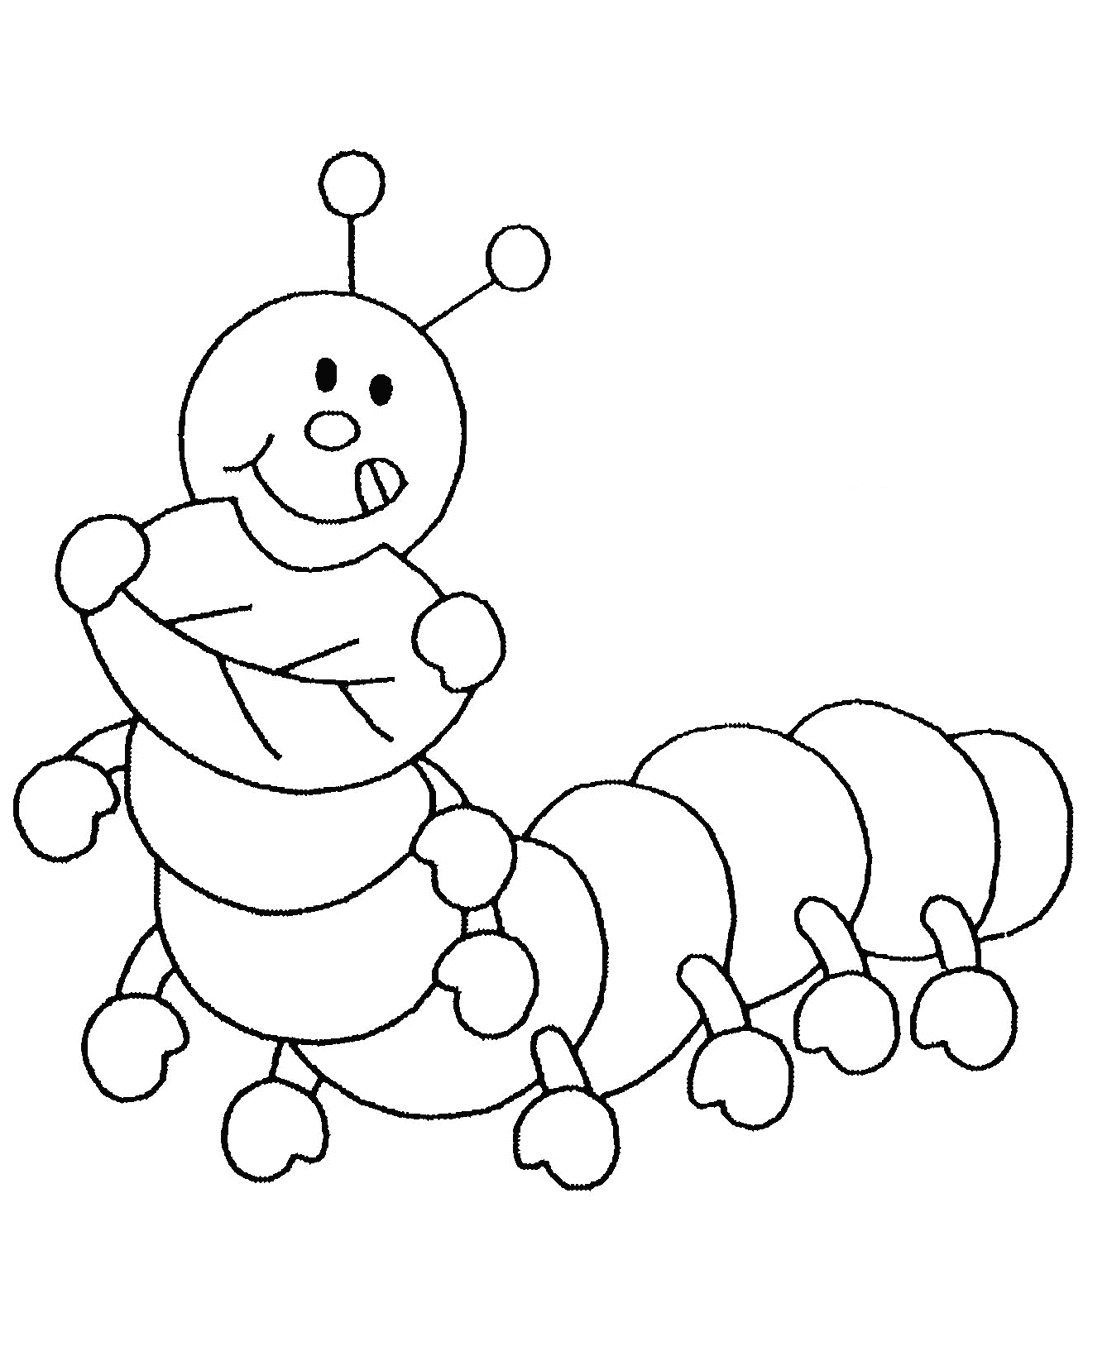 Caterpillar   Insects Coloring pages for kids to print & color